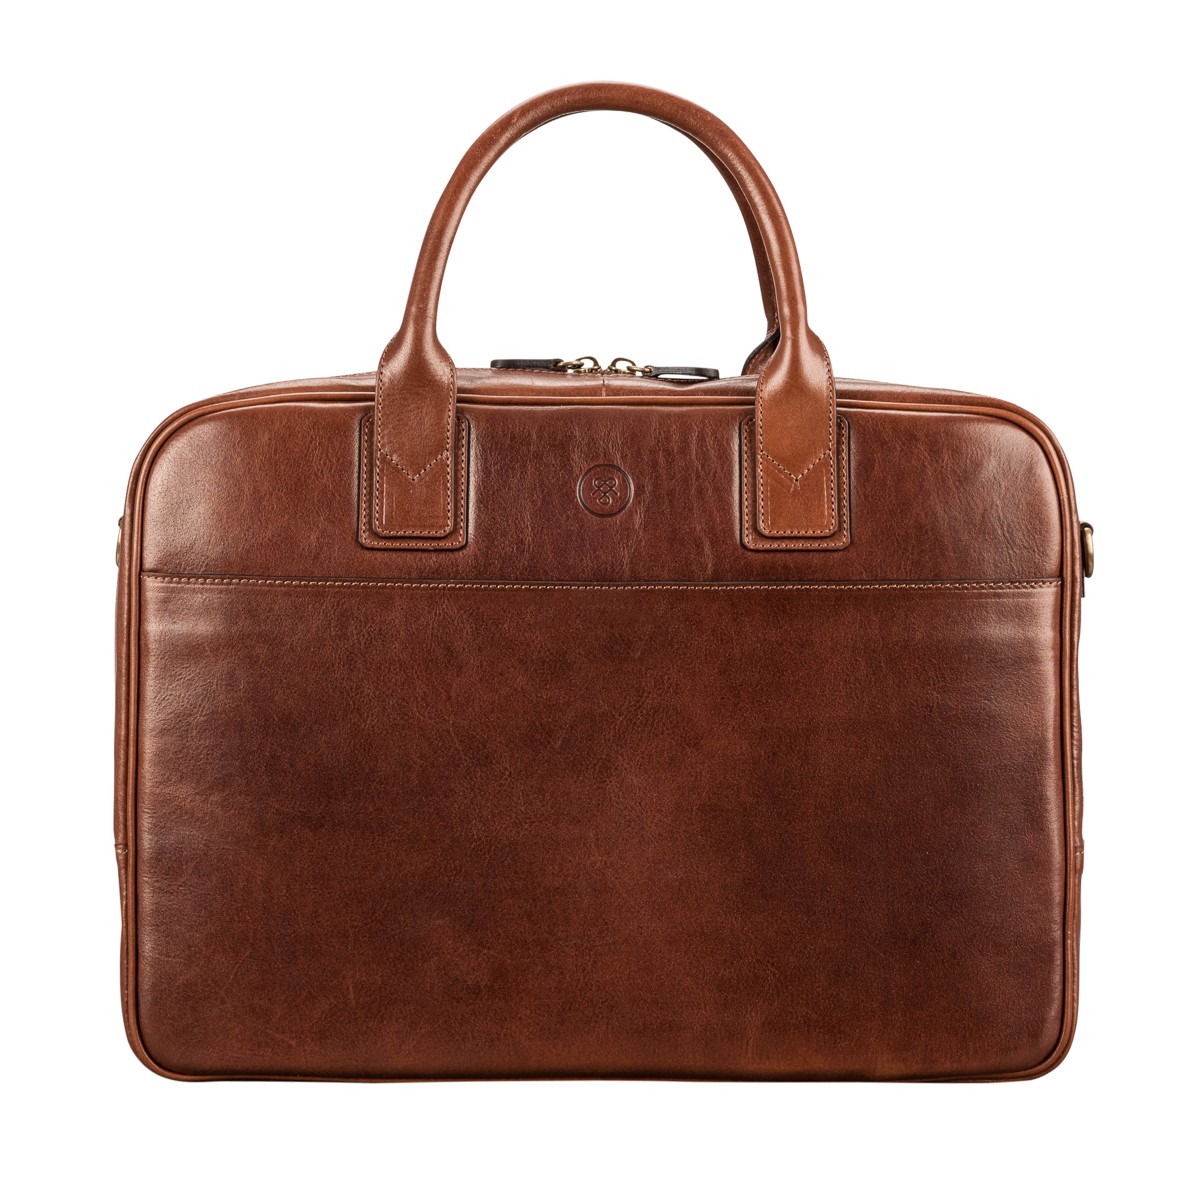 Leather laptop briefcase Bags & Purses Luggage & Travel Briefcases & Attaches Full Grain Leather Briefcase Macbook leather bag custom leather briefcase Leather office bag 